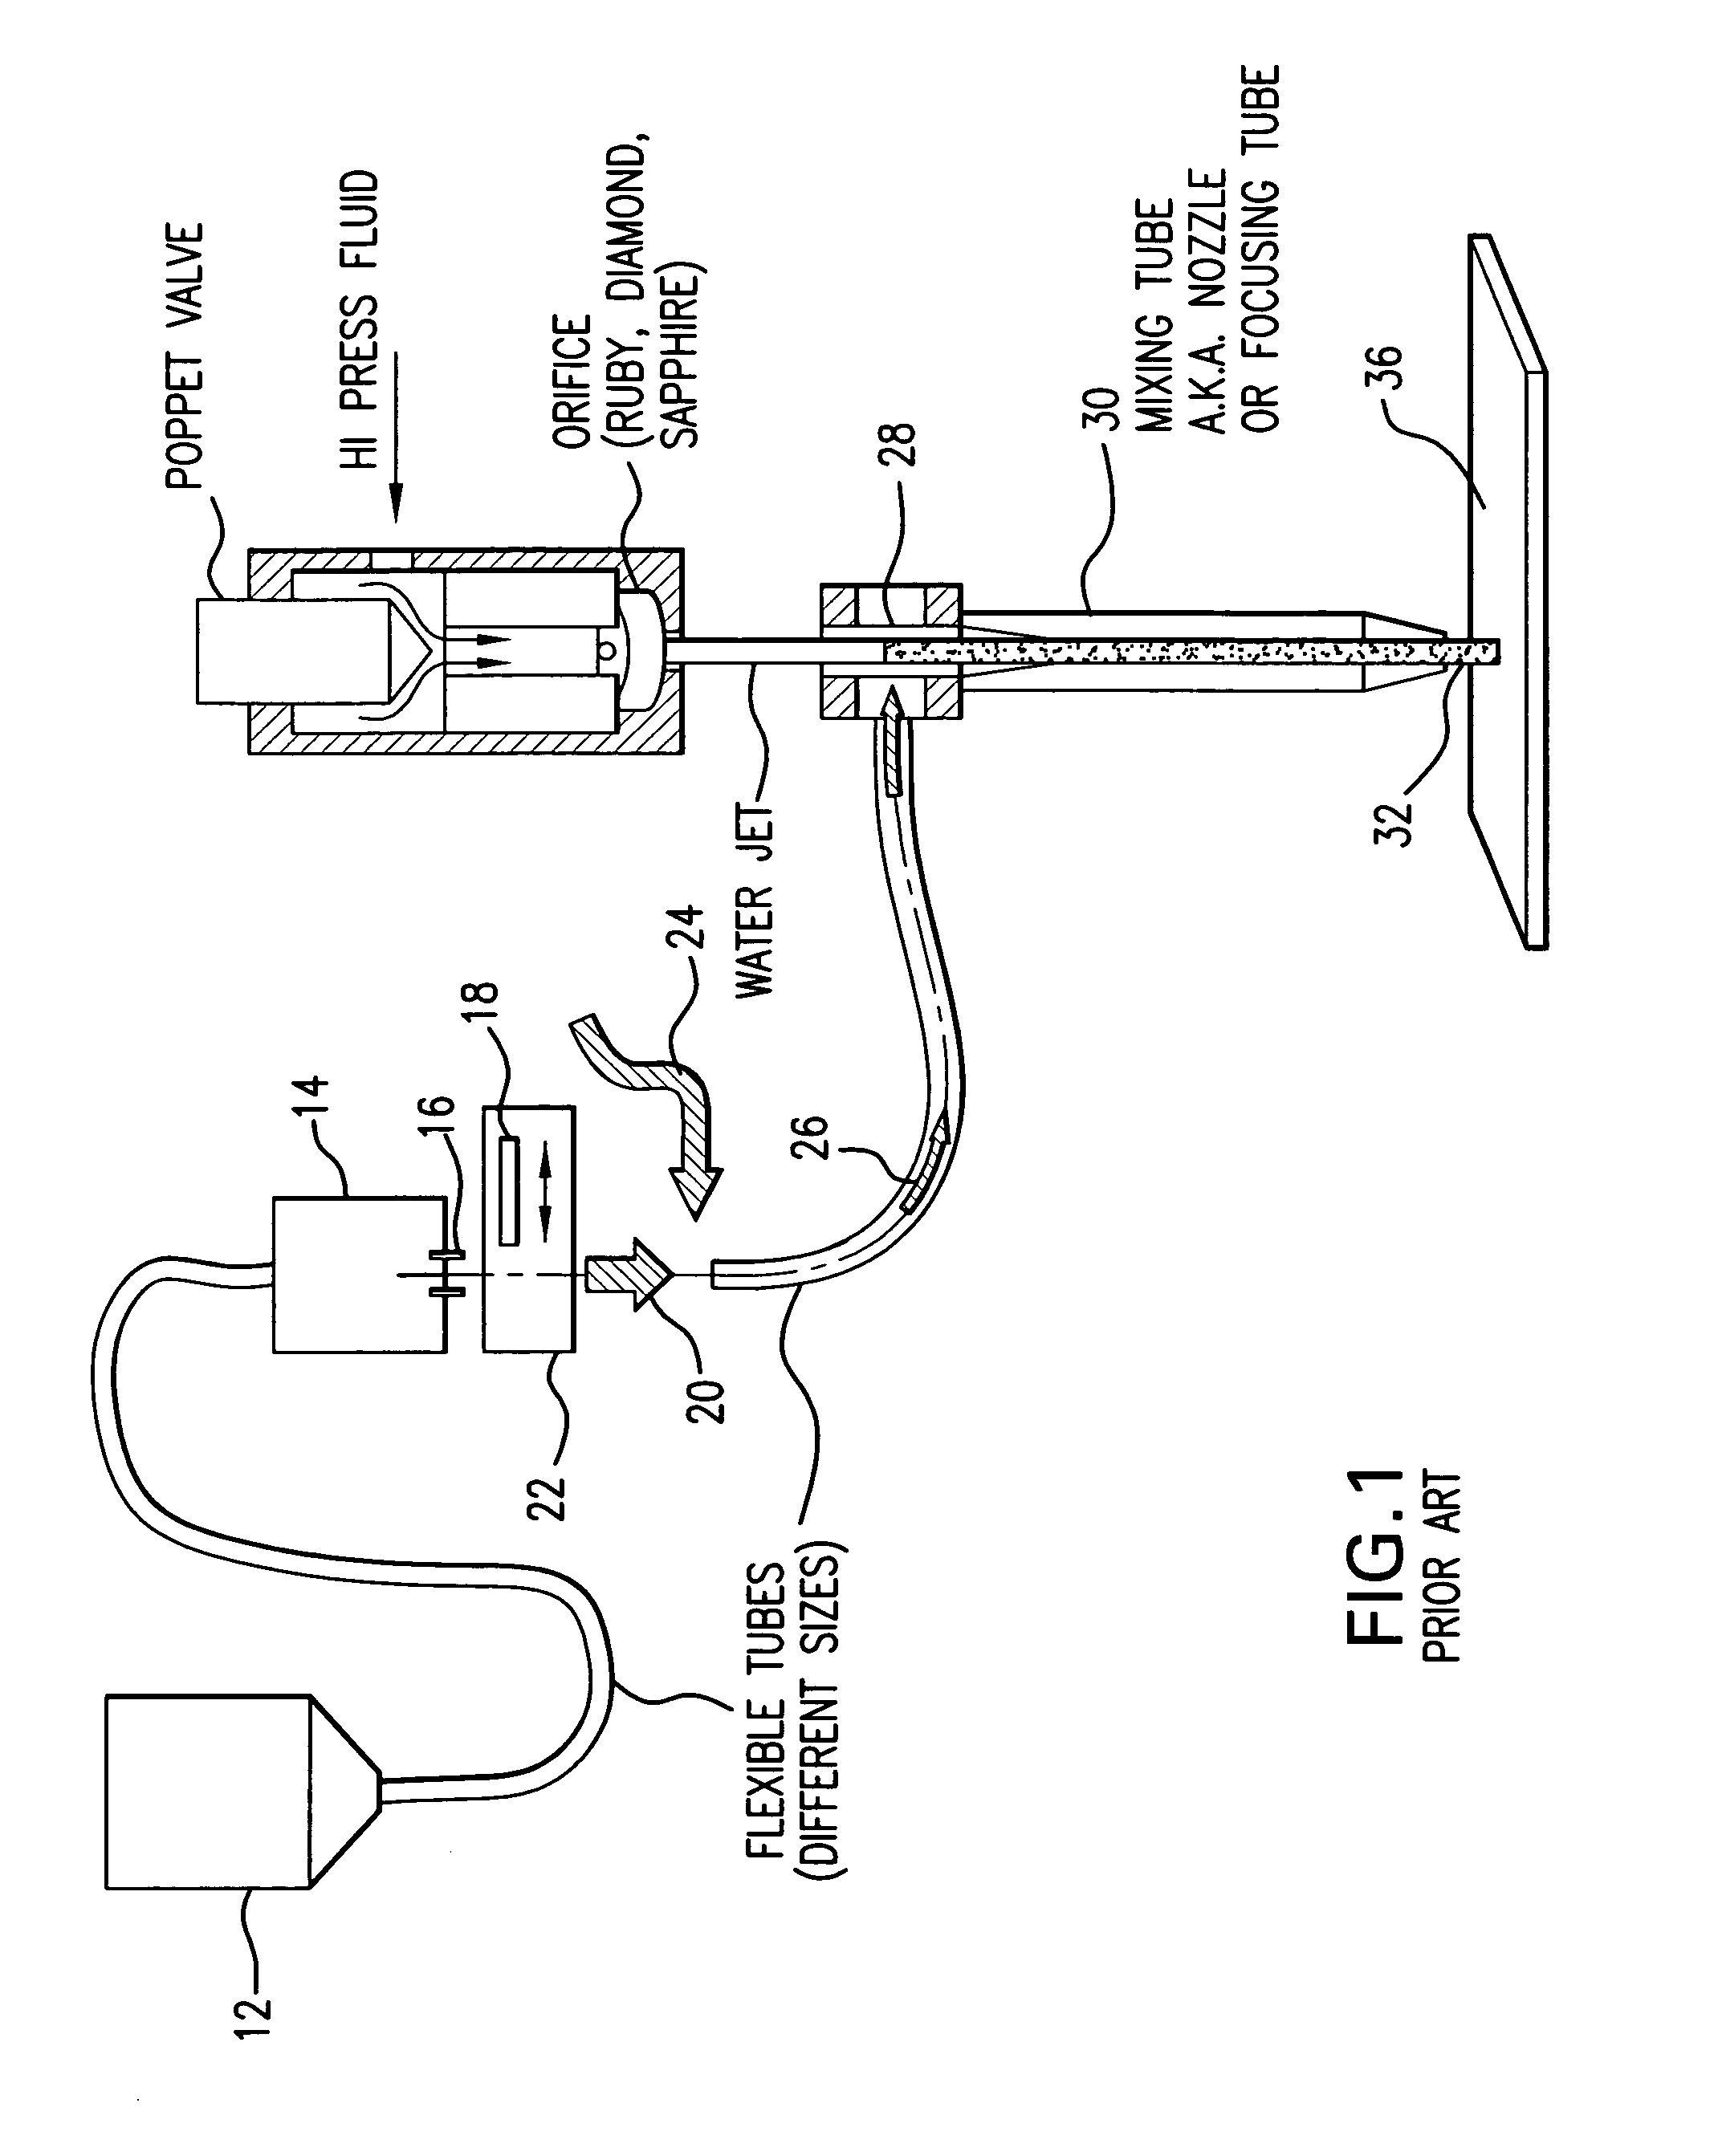 Variable rate dispensing system for abrasive material and method thereof